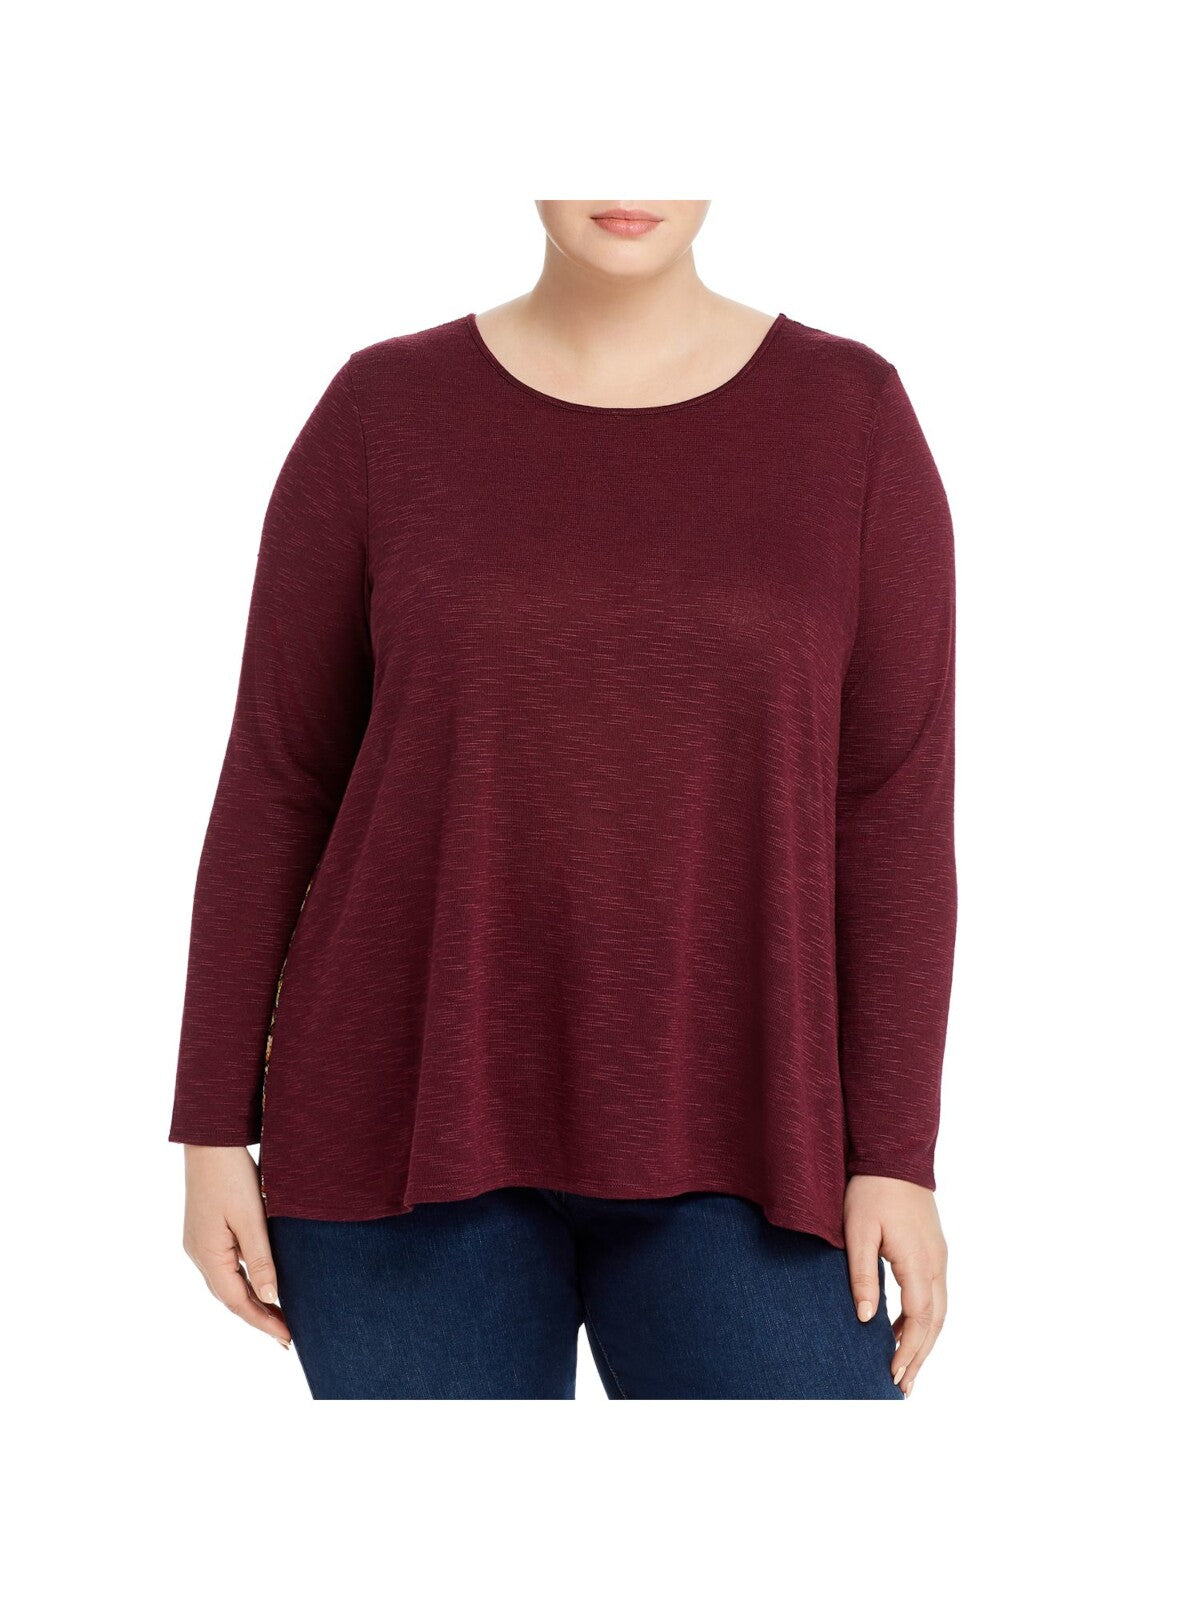 CHENAULT Womens Burgundy Stretch Ribbed Long Sleeve Round Neck Blouse Plus 1X